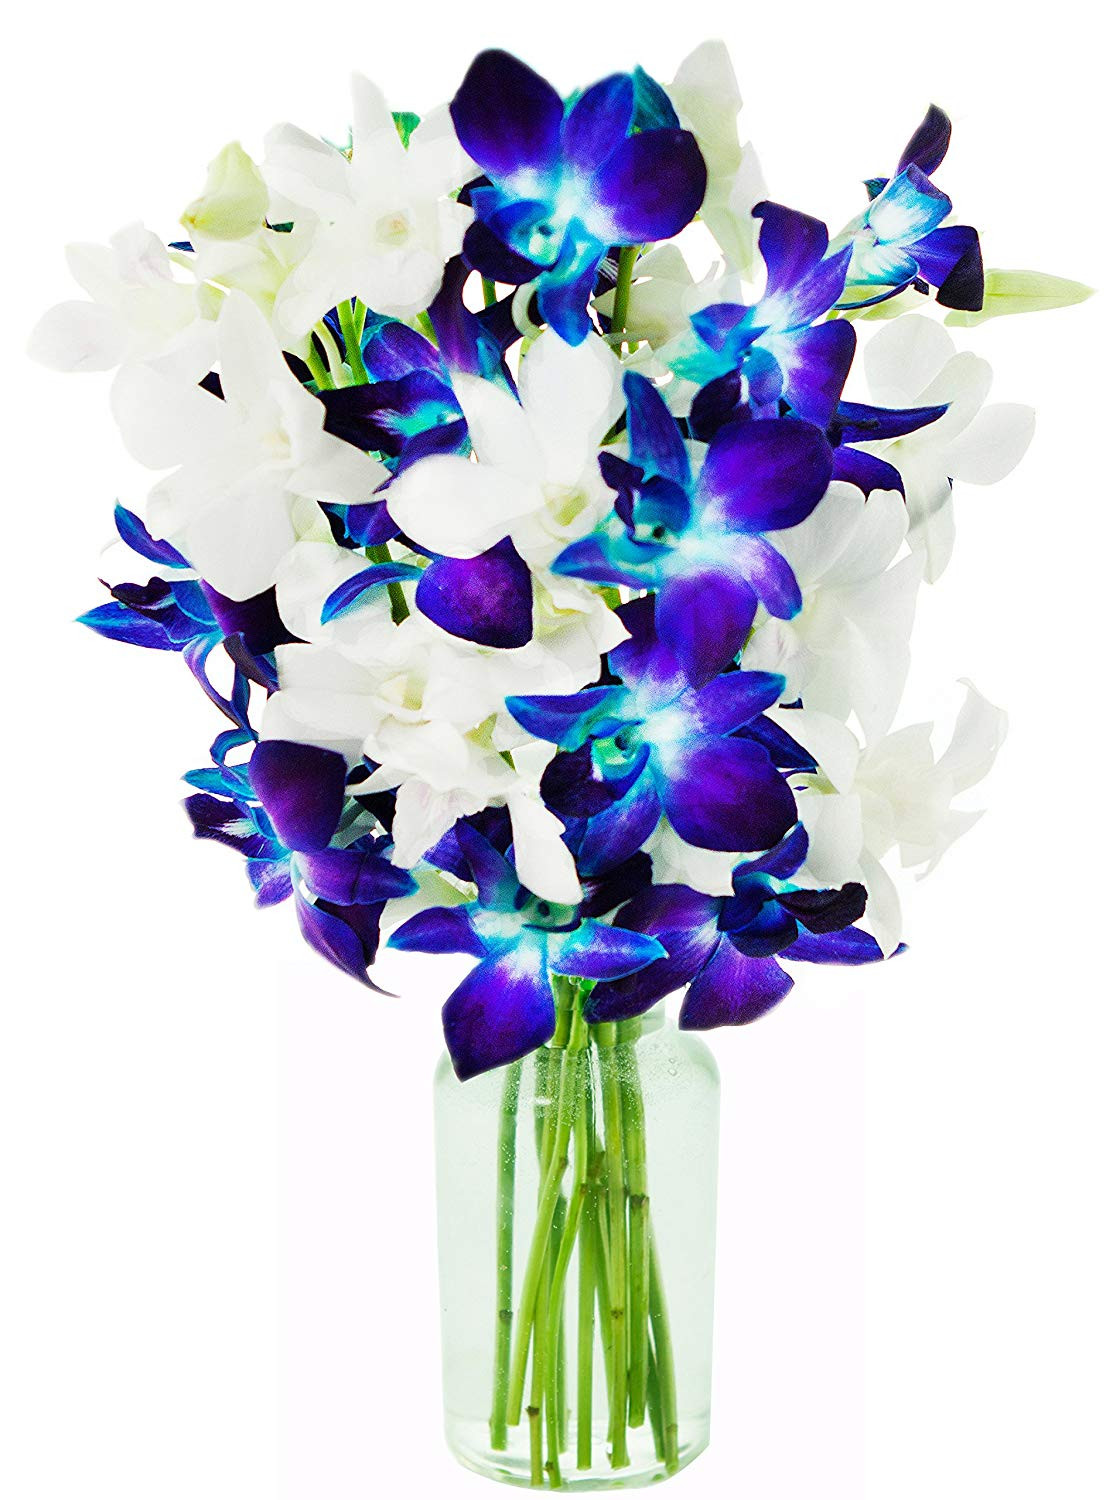 28 Unique Proflowers 19.99 Free Vase 2024 free download proflowers 19 99 free vase of best more home garden deals and more home garden for sale with regard to kabloom 10 stems sapphire diamond blue and white dendrobium orchids with vase 2 5 pound